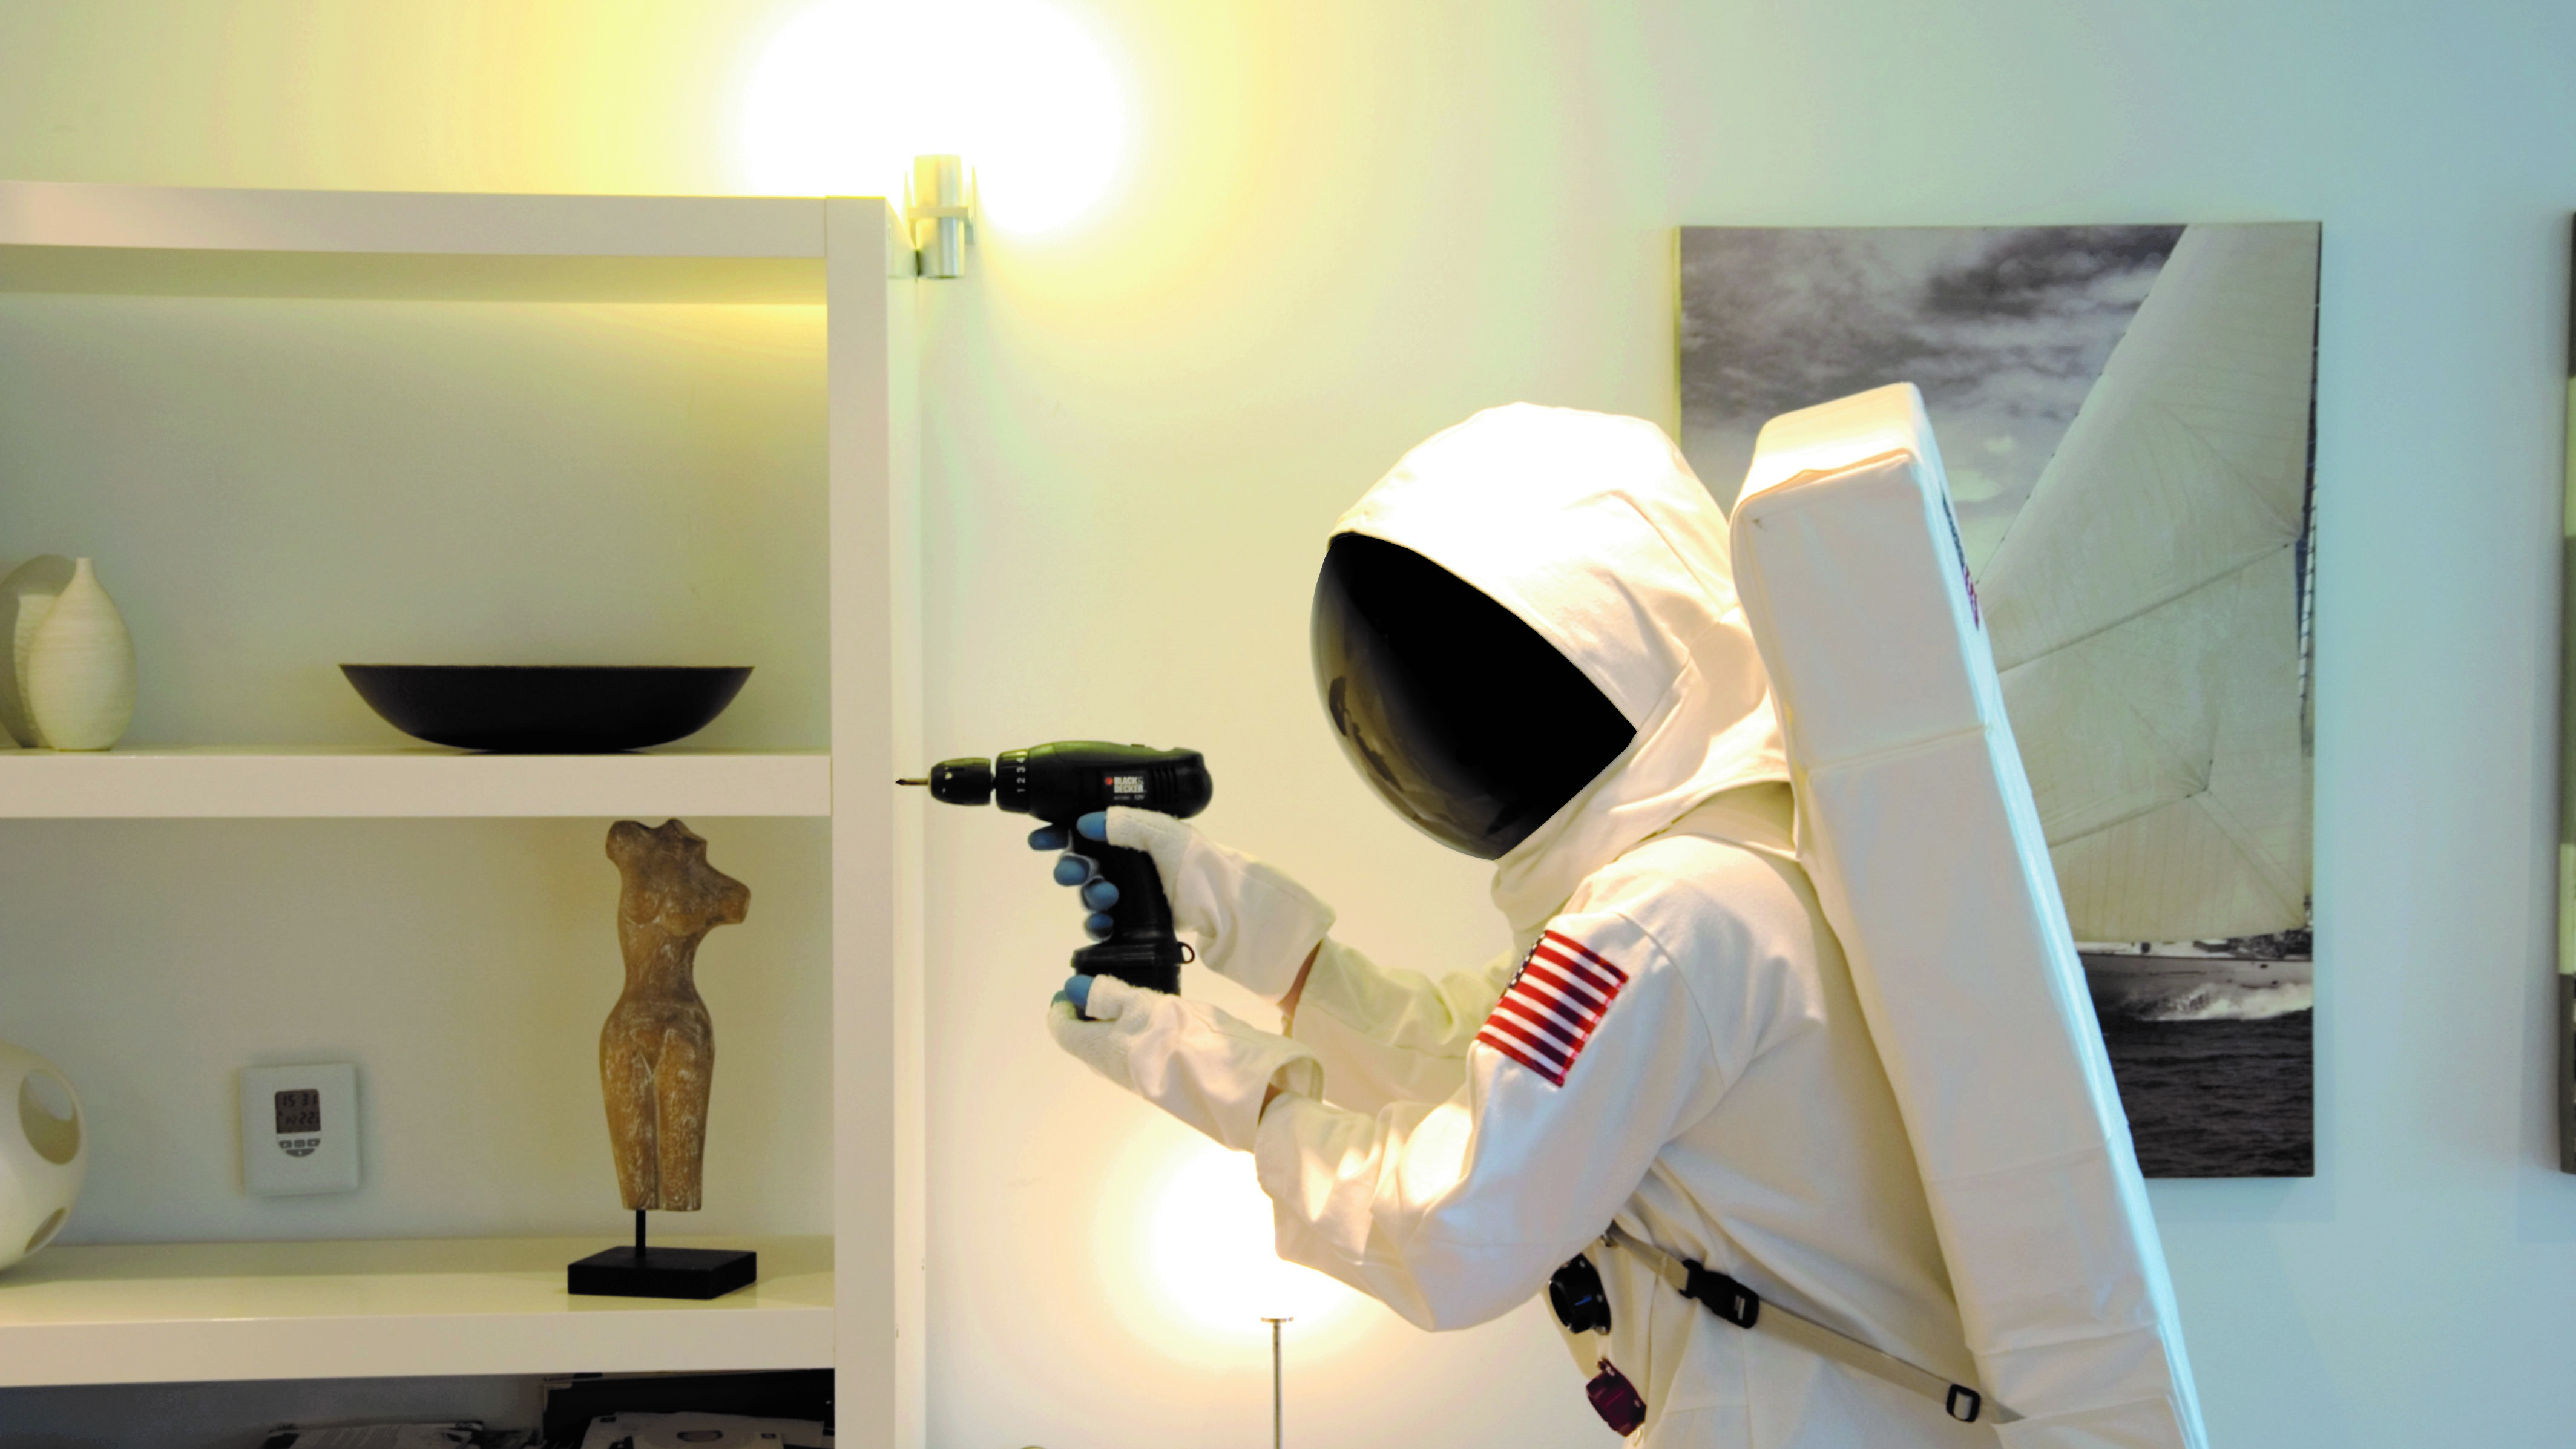 a person dressed as an astronaut using a cordless drill at home.